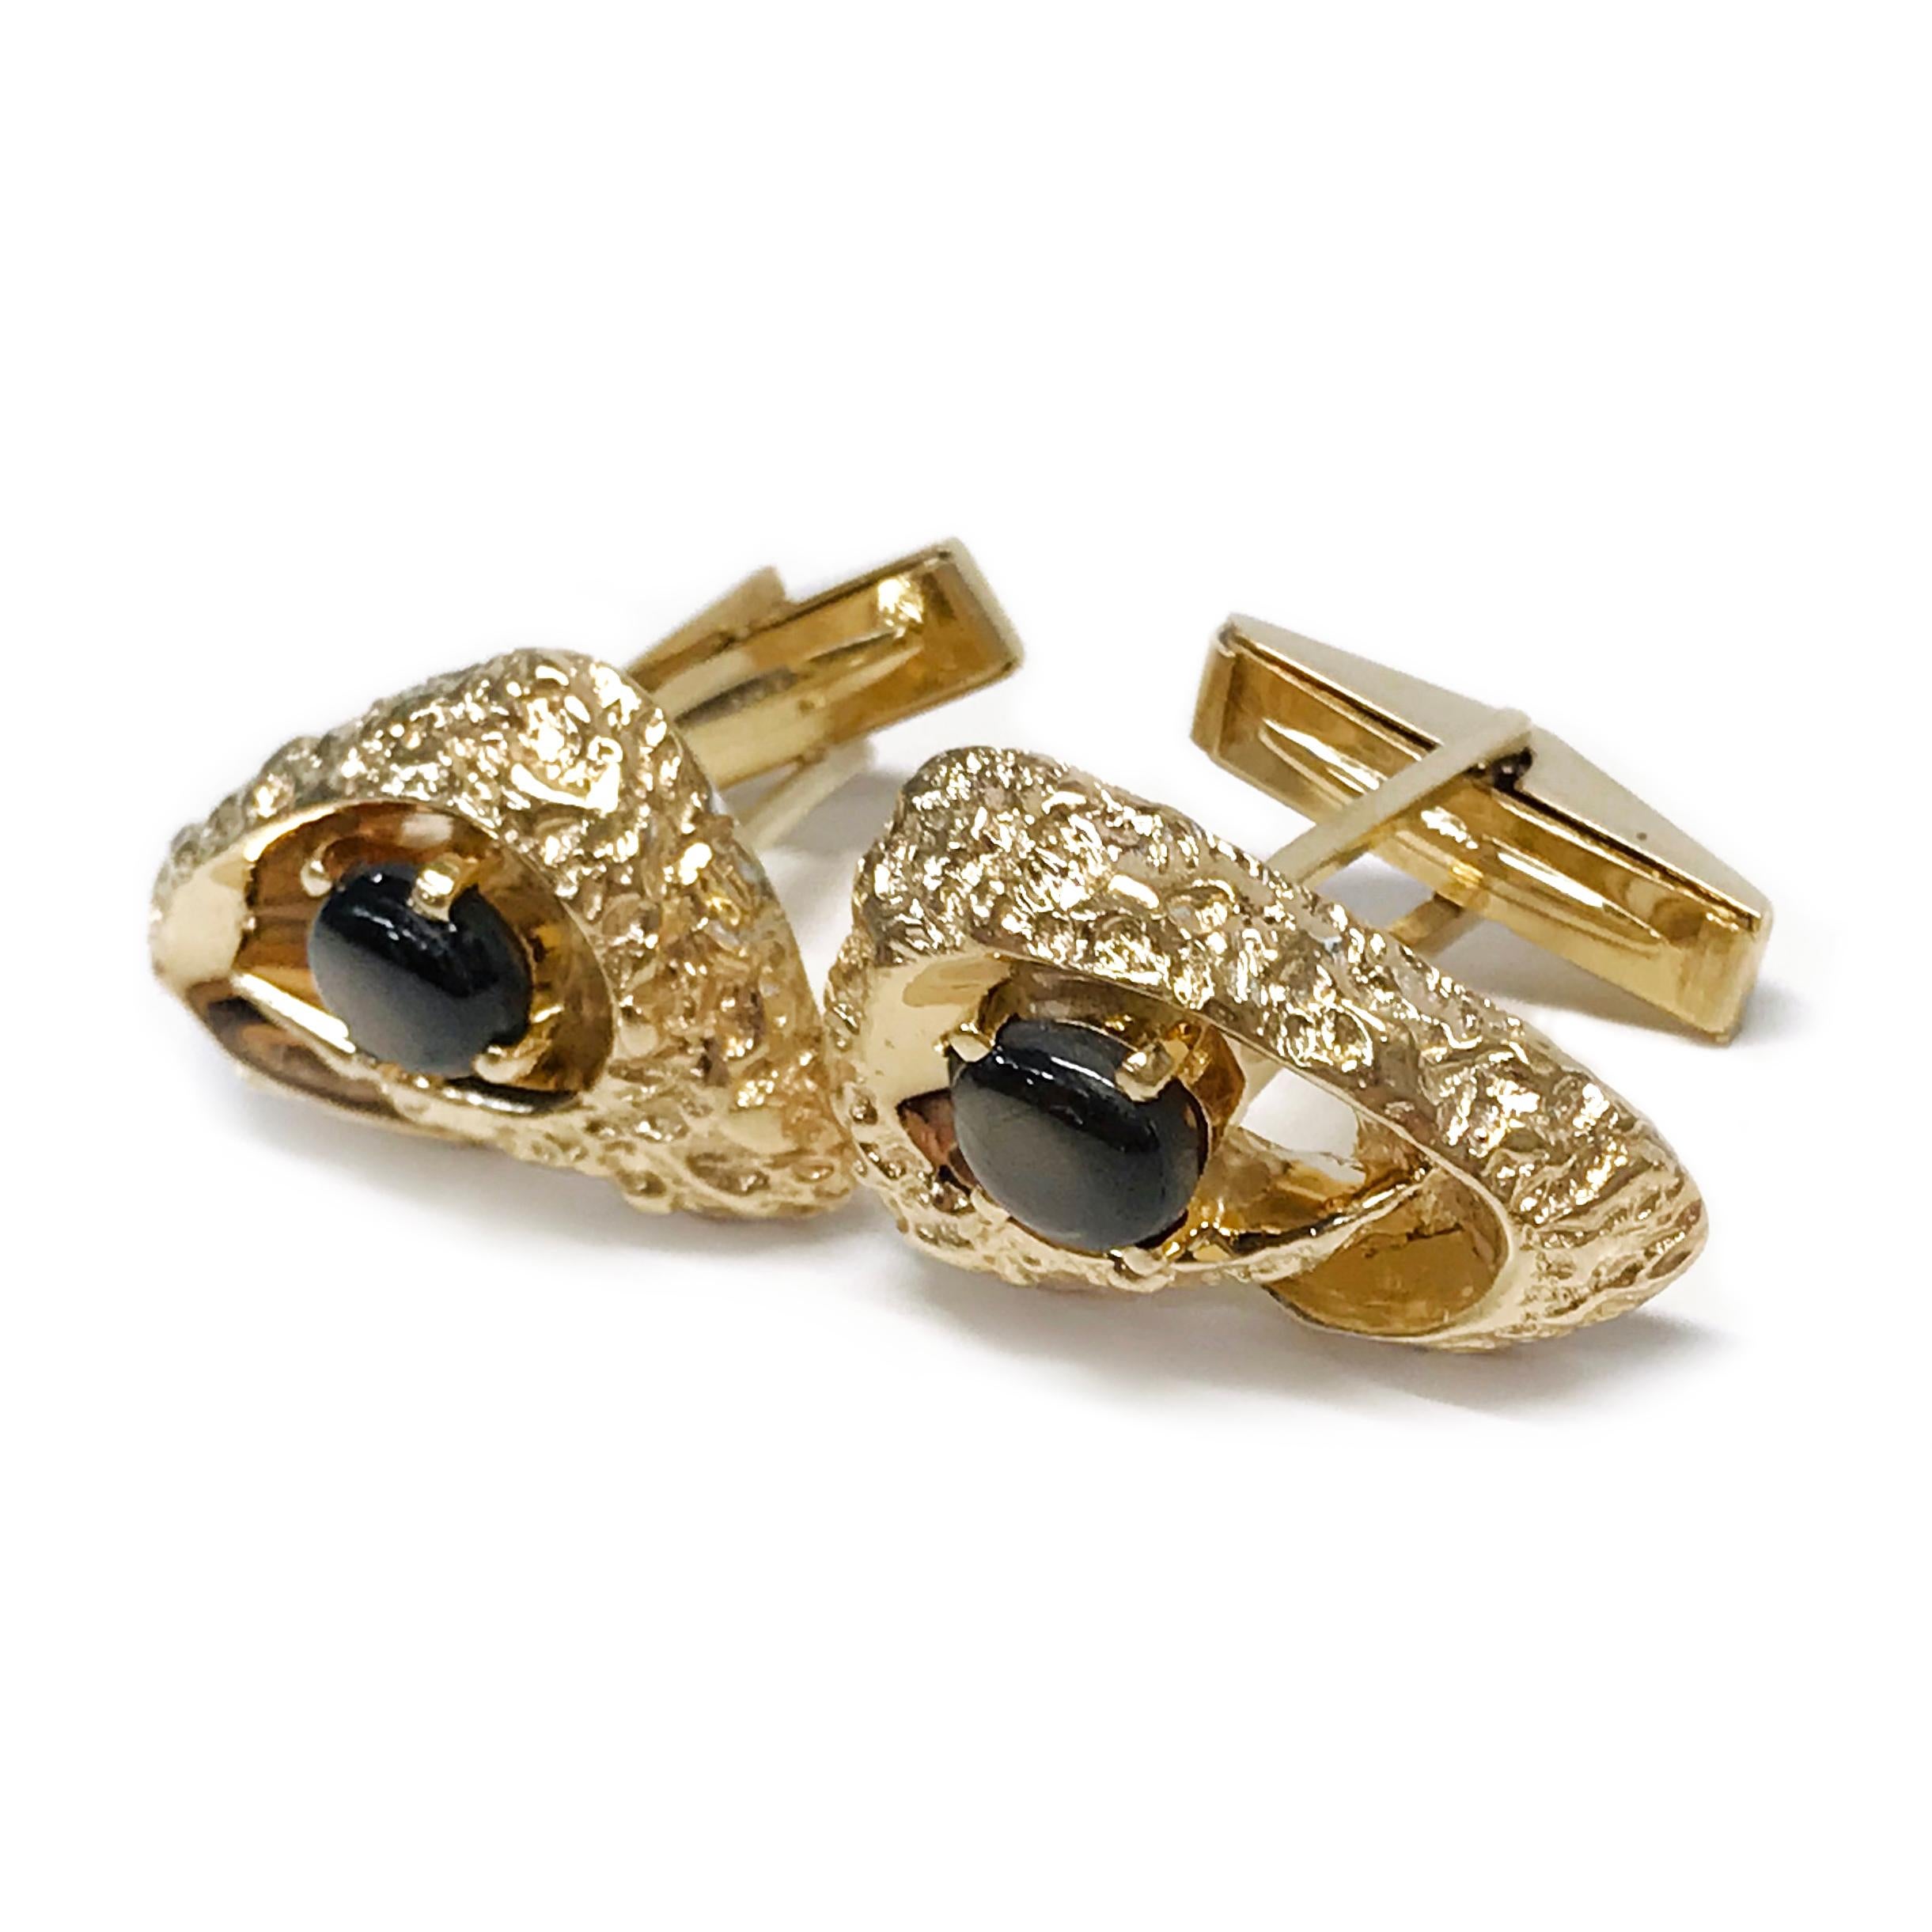 Black Star Sapphire Triangle-Shaped Swoosh Gold Nugget Cufflinks. The cufflinks are triangle-shaped with rounded edges and a 6.5x7.4mm black star sapphire prong-set at in the center. The cufflinks are gold nugget style with the post and backings in